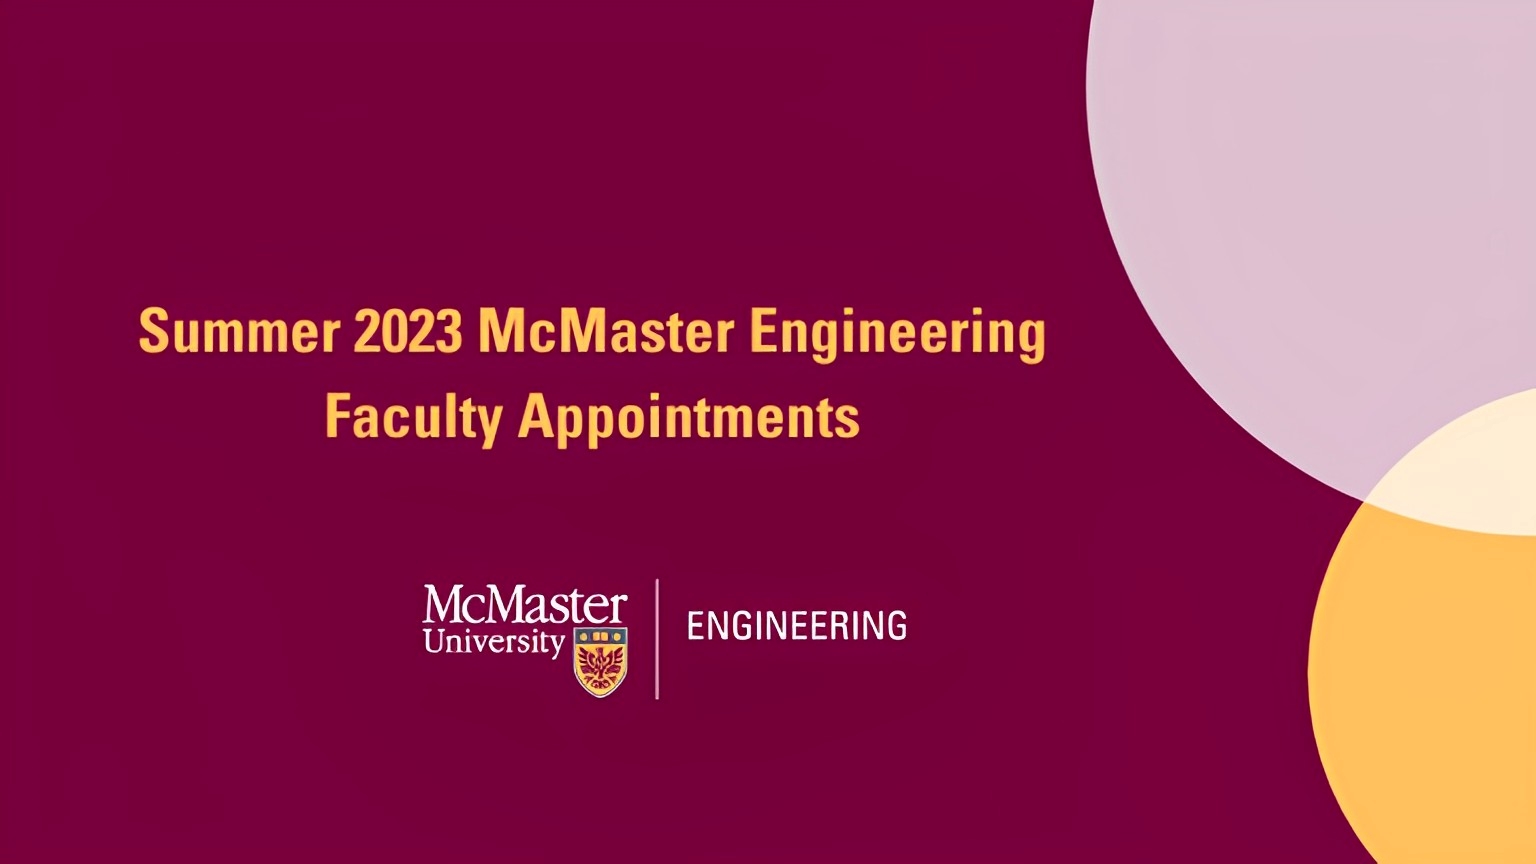 Summer 2023 McMaster Engineering Faculty Appointments